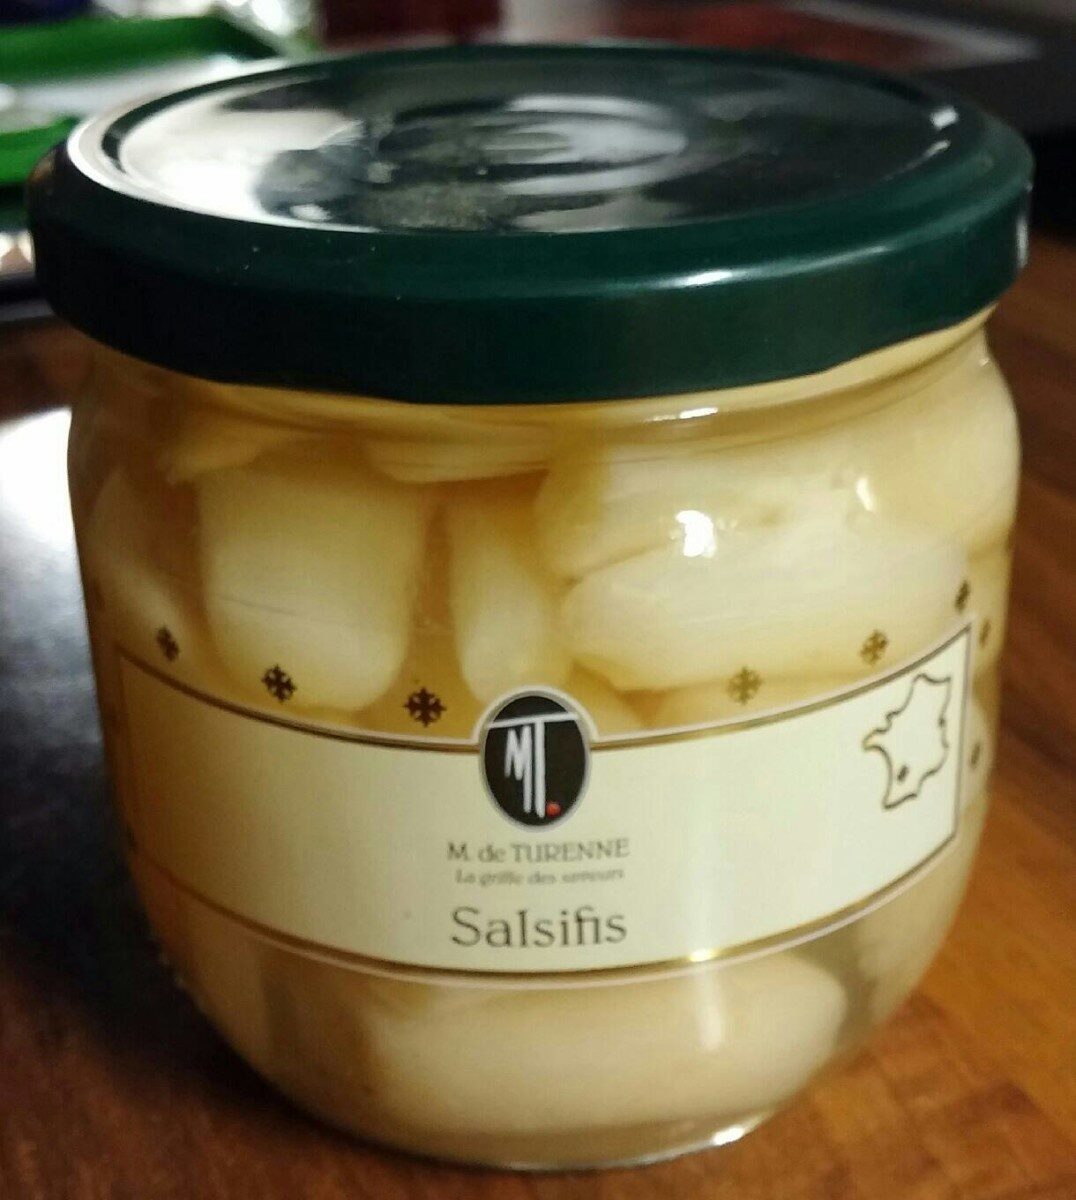 Salsifis 205g - Product - fr